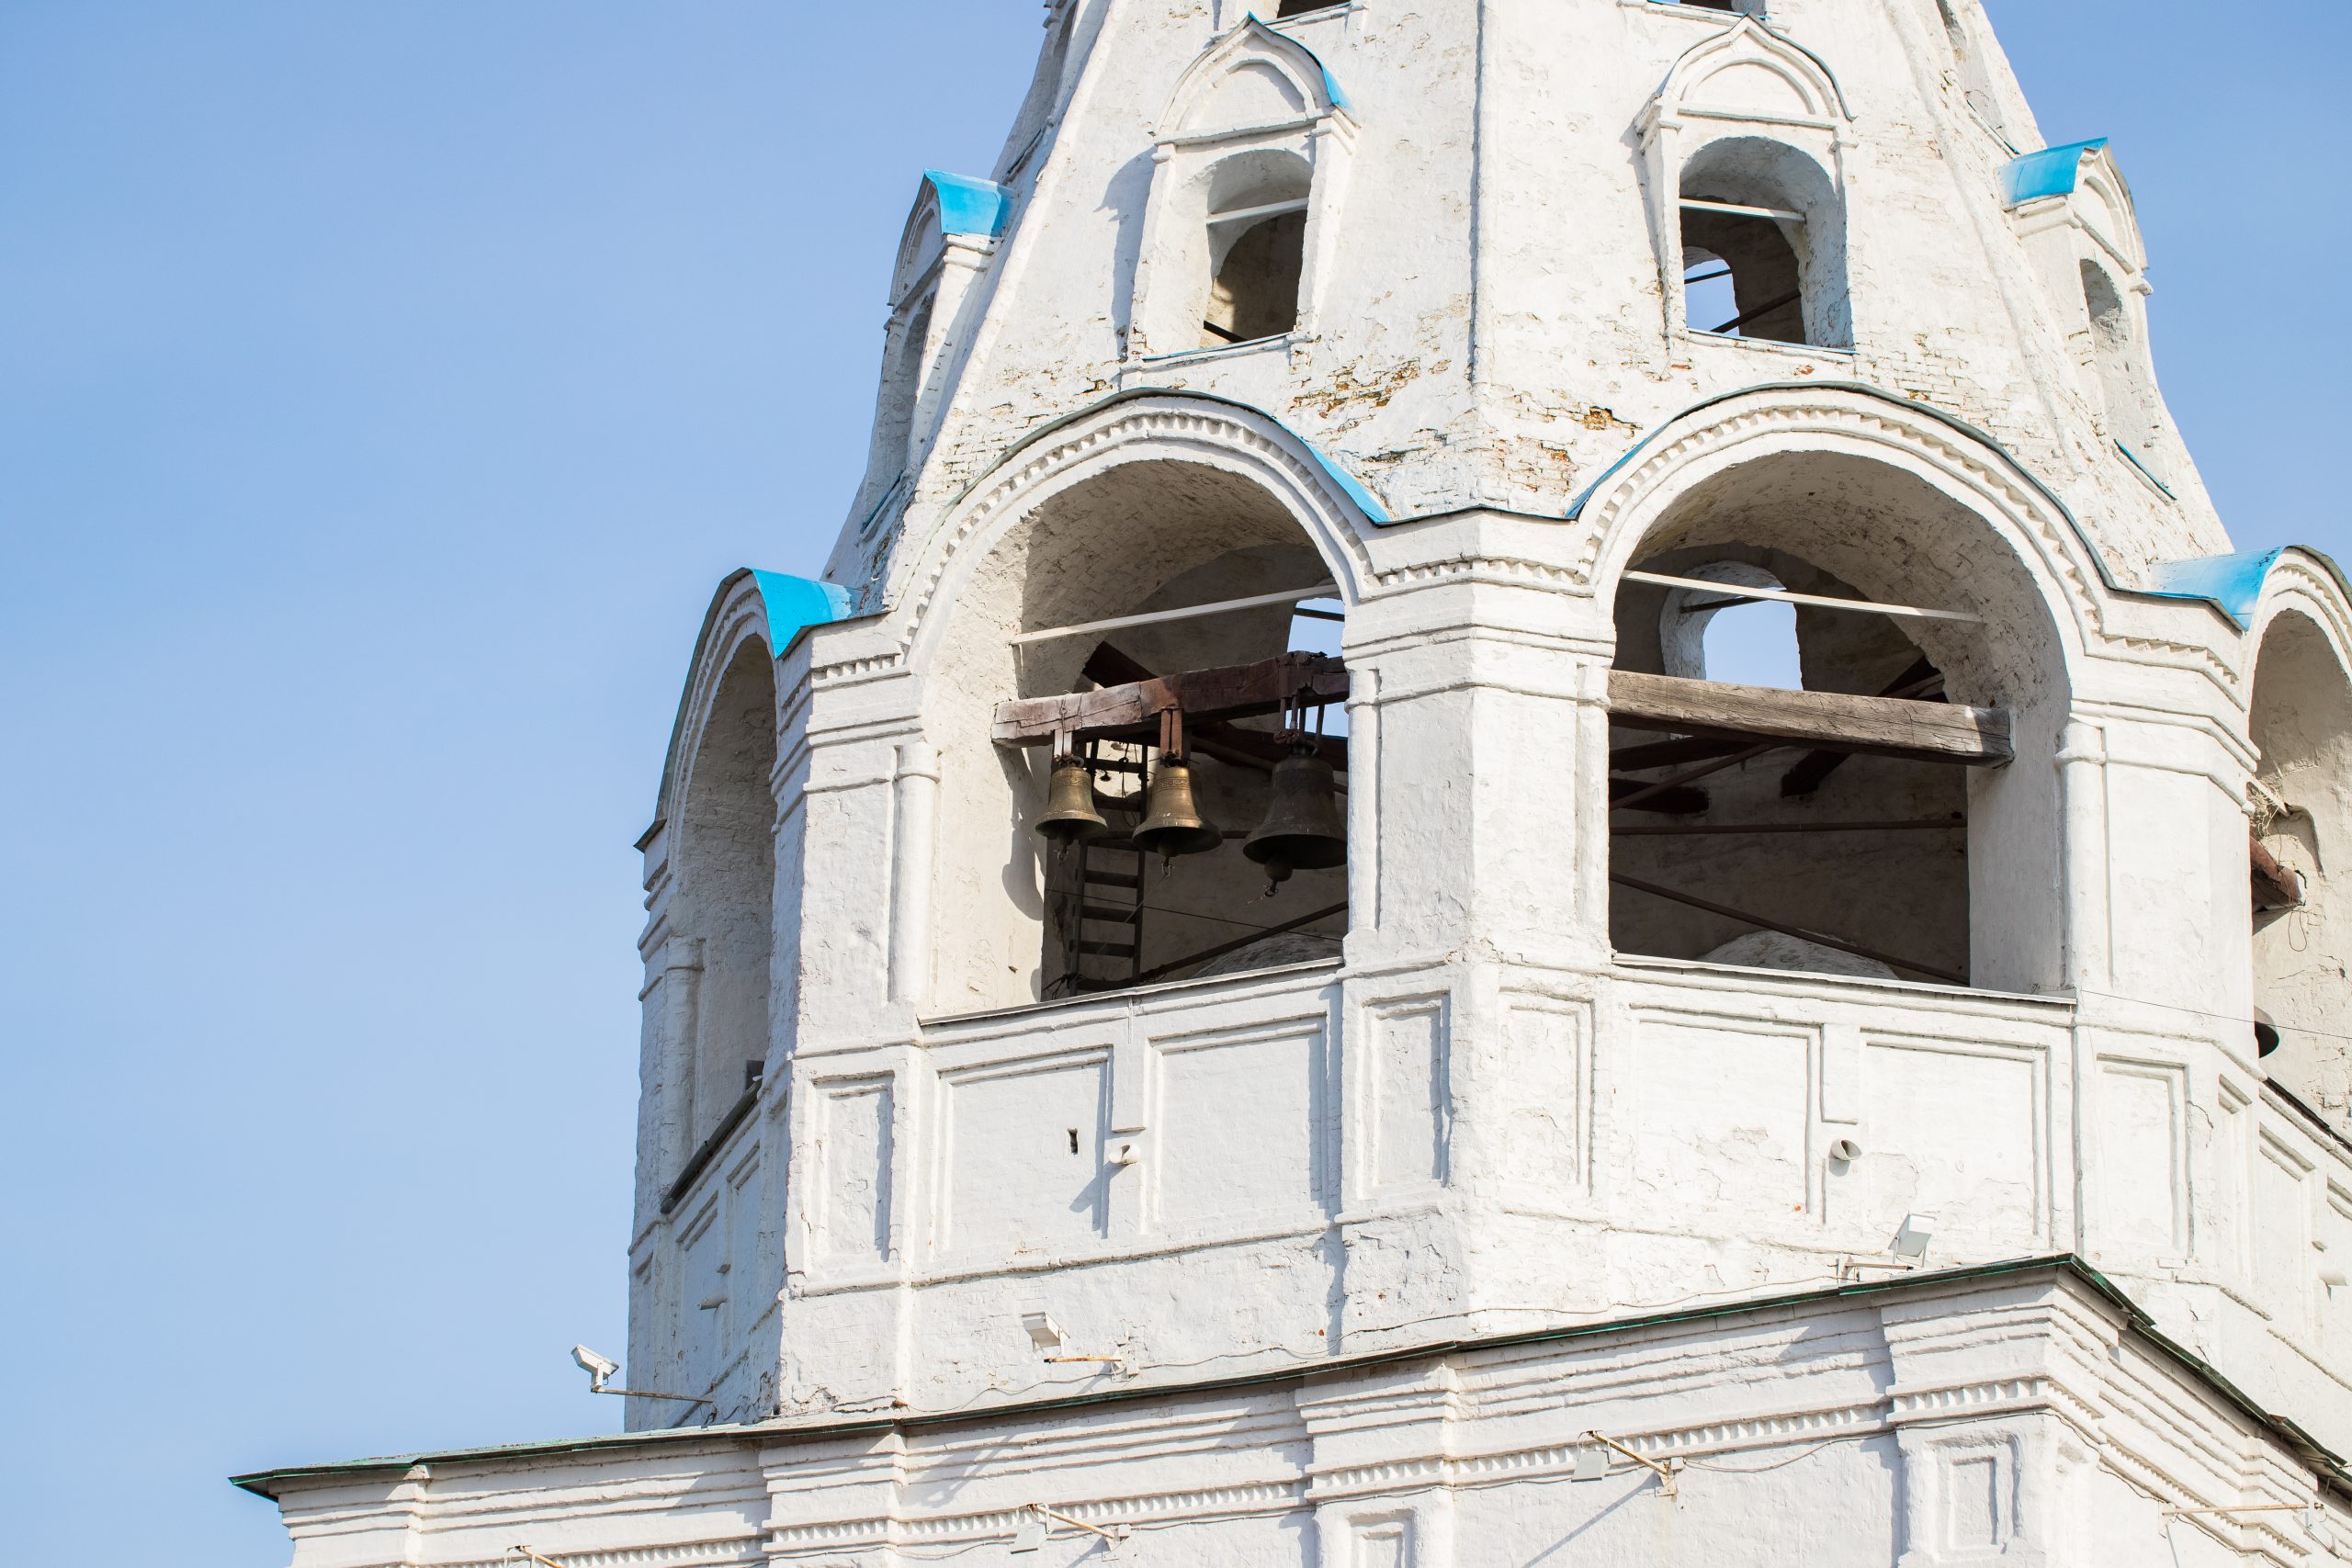 Bells,Of,Shatrovaya,Bell,Tower,On,Cathedral,Square,In,Kolomna,